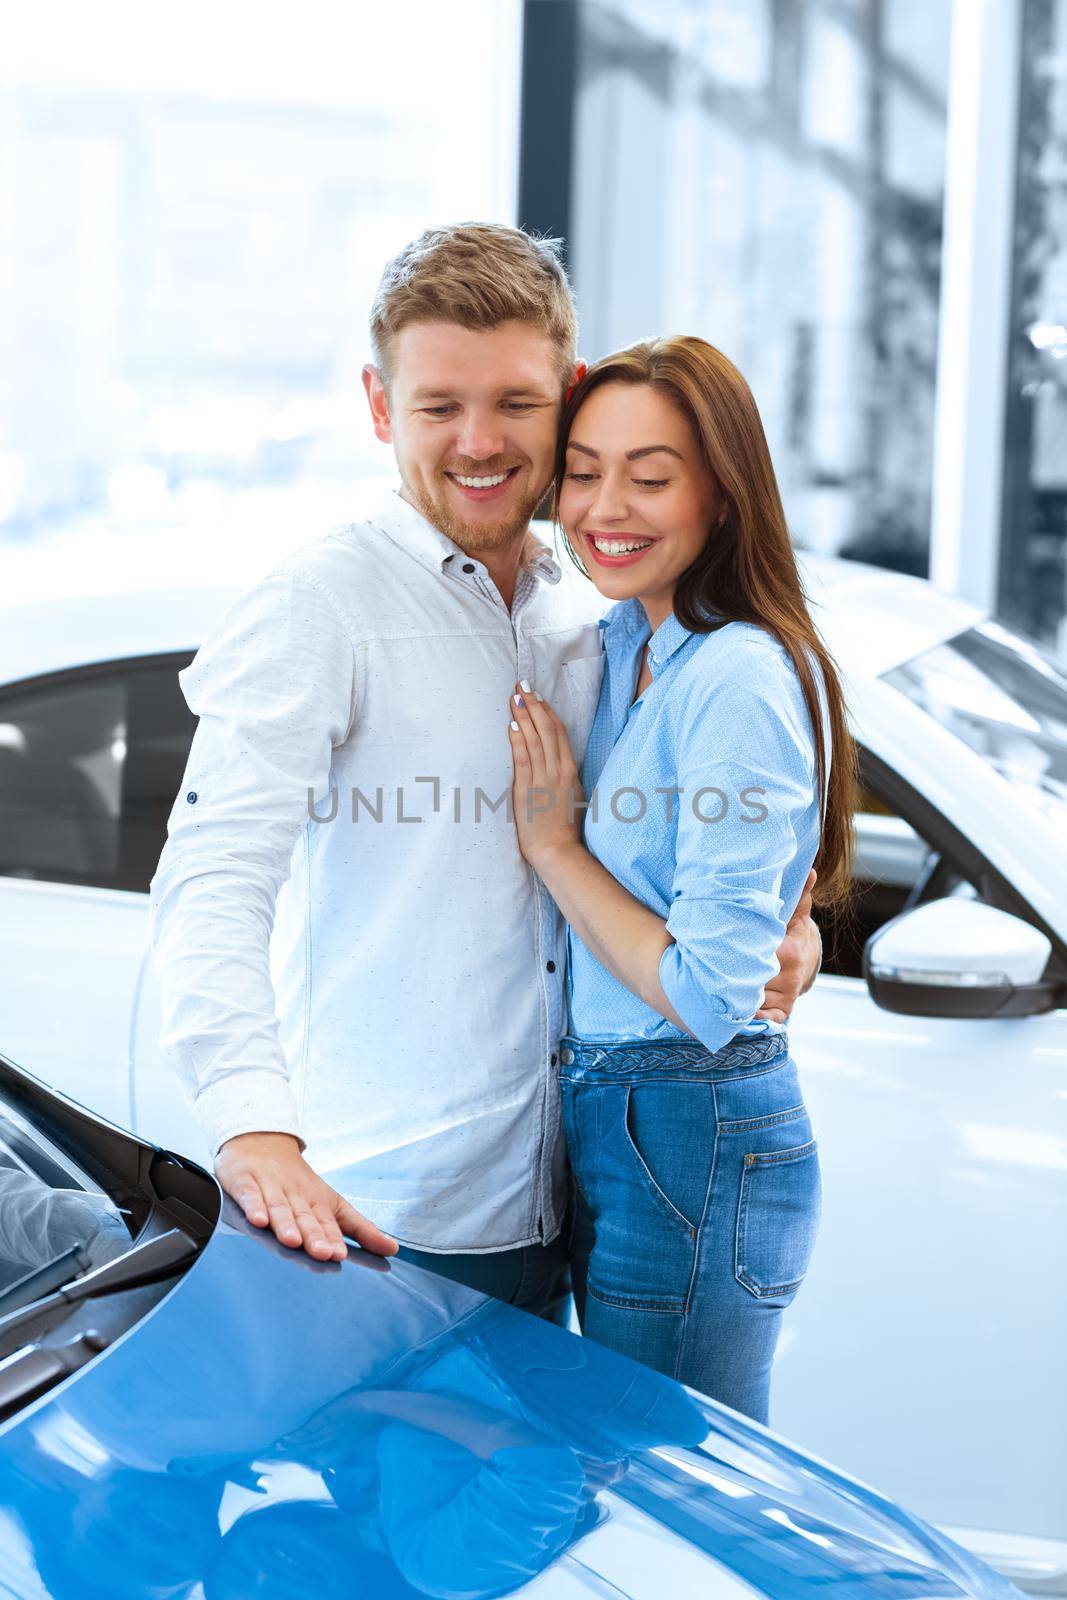 They dreamed of this day. Vertical shot of a handsome man hugging his happy girlfriend smiling cheerfully while touching a new car at the dealership